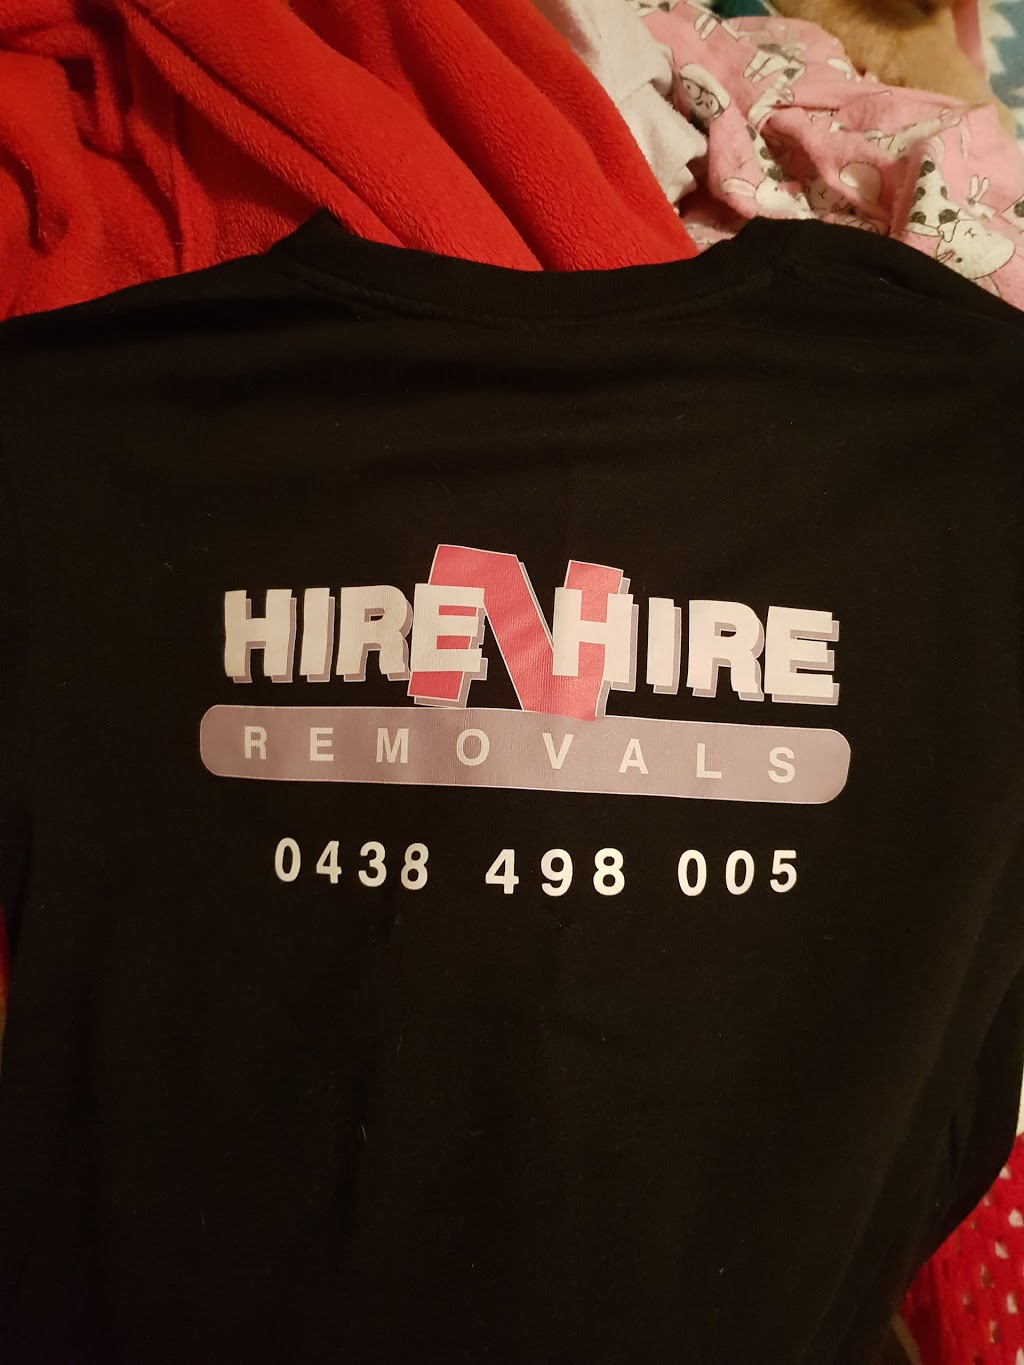 Hire N Hire Events, Removals, Marquee and Trailer Hire | moving company | 2/12 Kylie Cres, Batemans Bay NSW 2536, Australia | 0244728333 OR +61 2 4472 8333